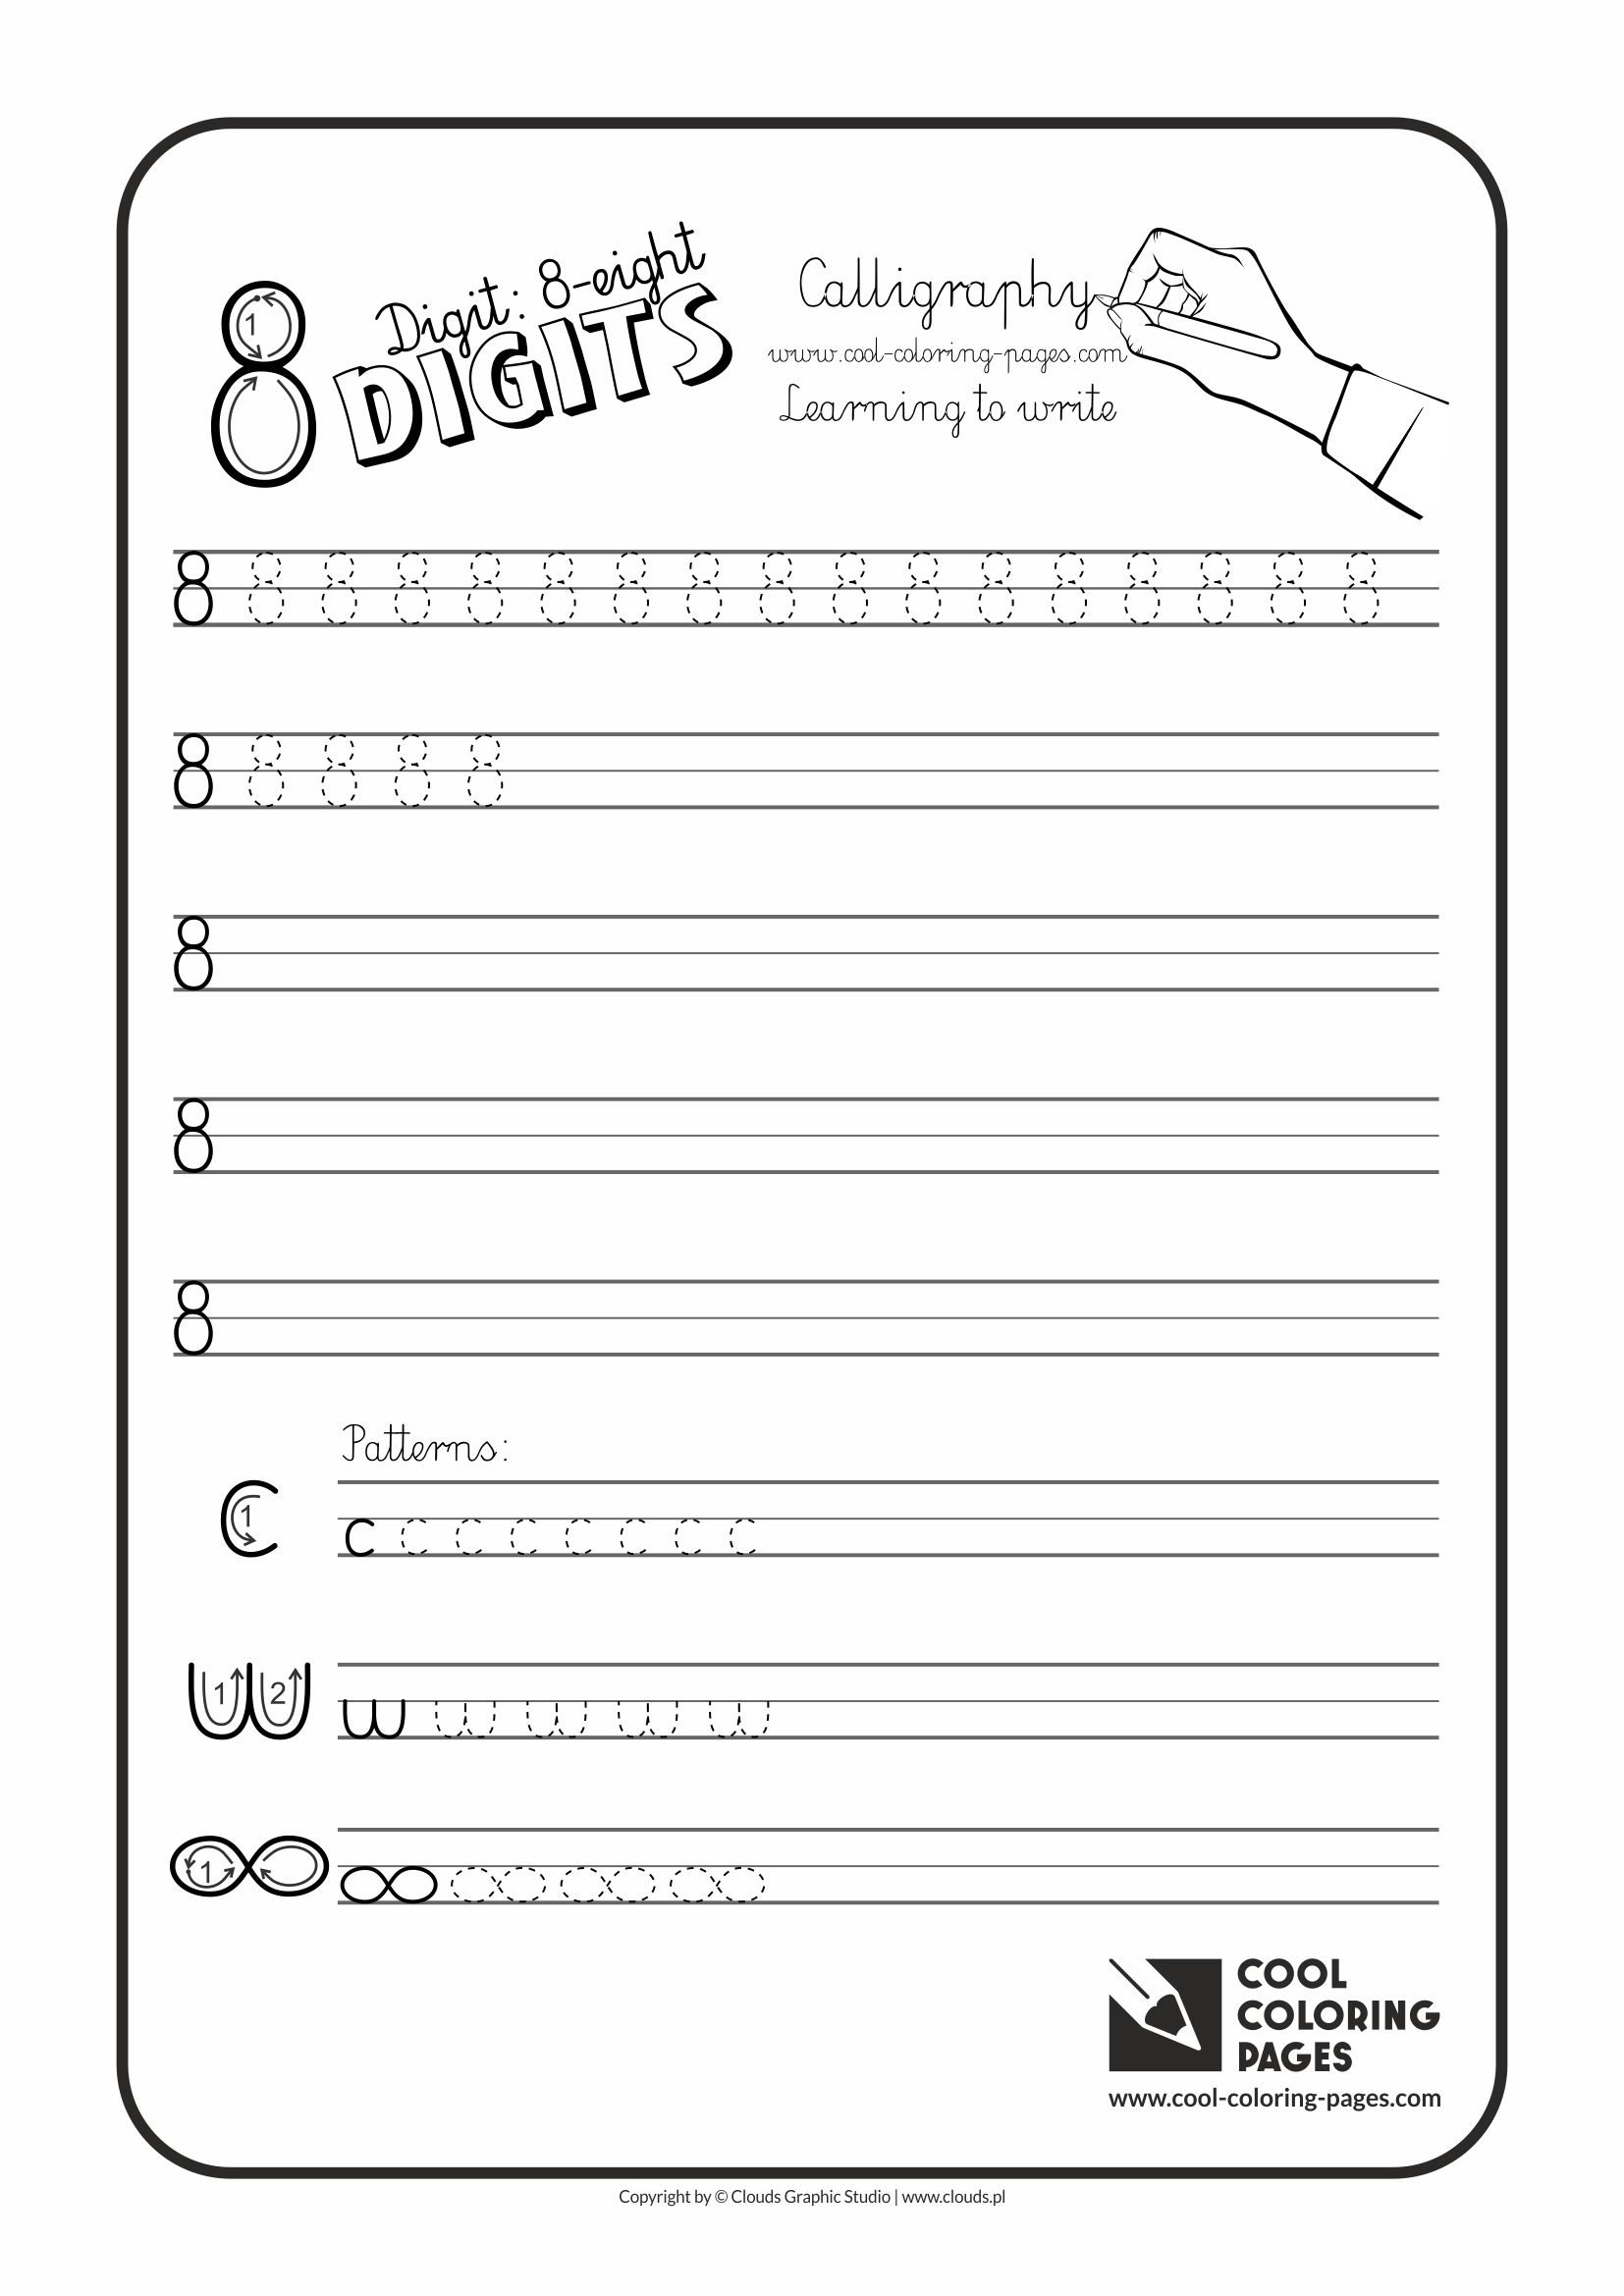 Cool Coloring Pages / Calligraphy / Digit 8 / Handwriting for kids